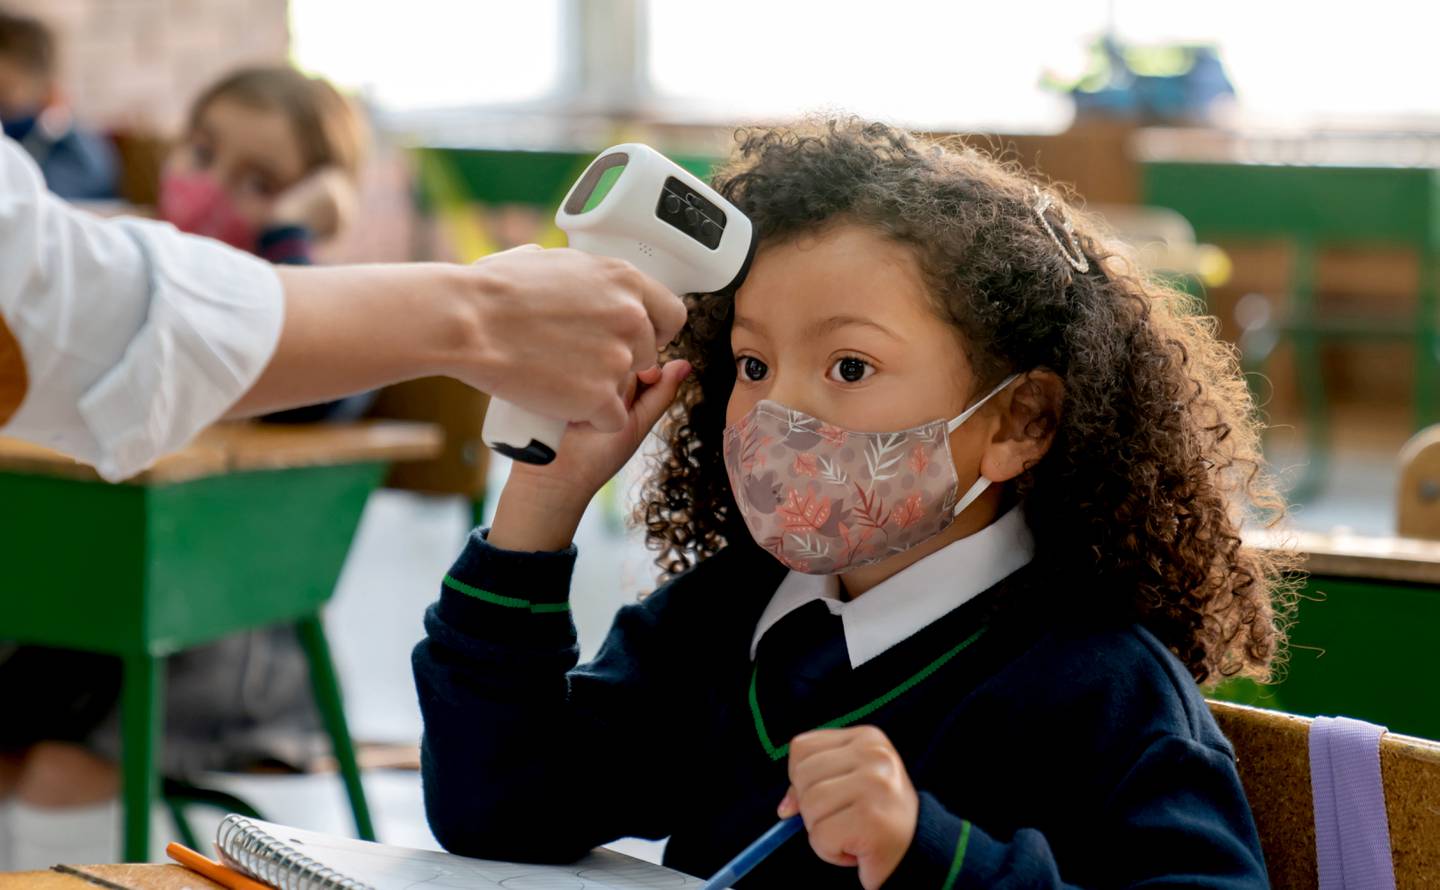 Latin American teacher checking the temperature of a girl at school using an infrared thermometer during the COVID-19 pandemic